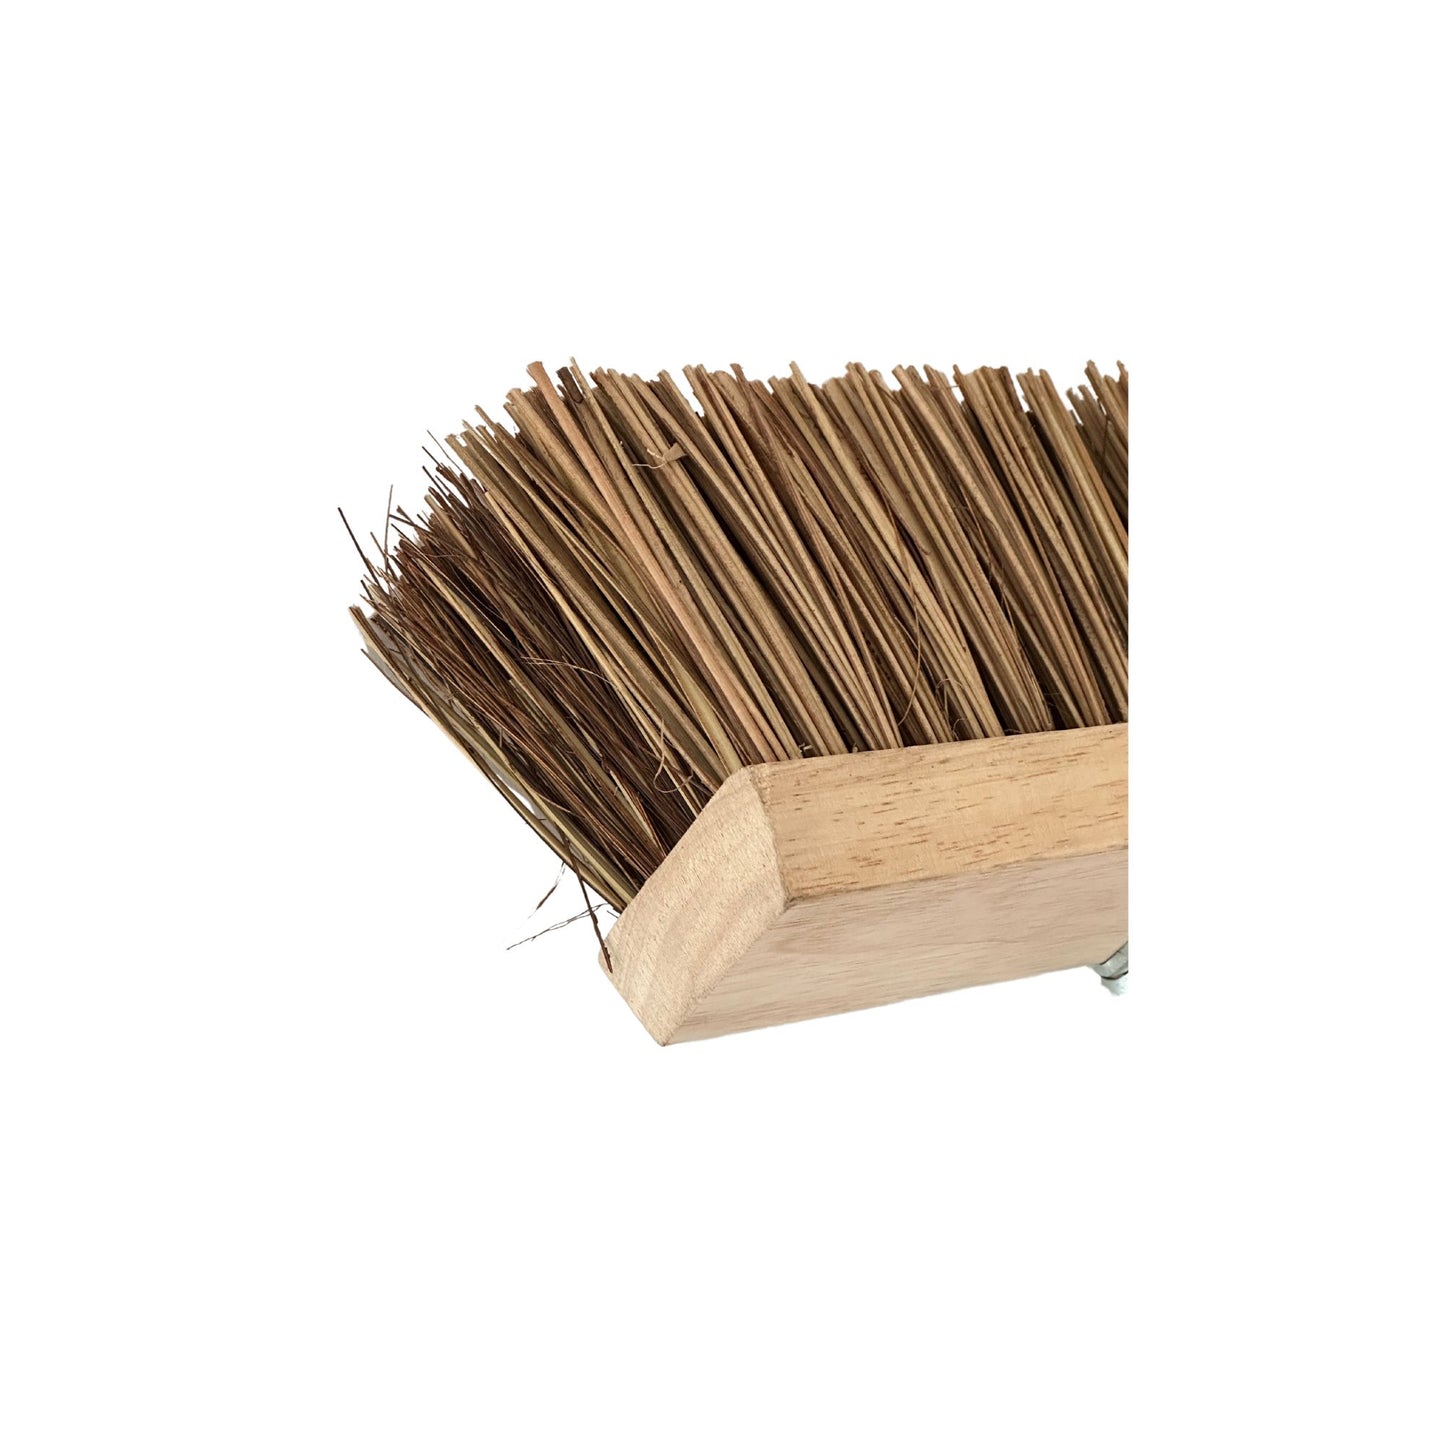 Viking Yard Broom - Bassine And Cane Mix with Cane Front - 355mm - VTBY1